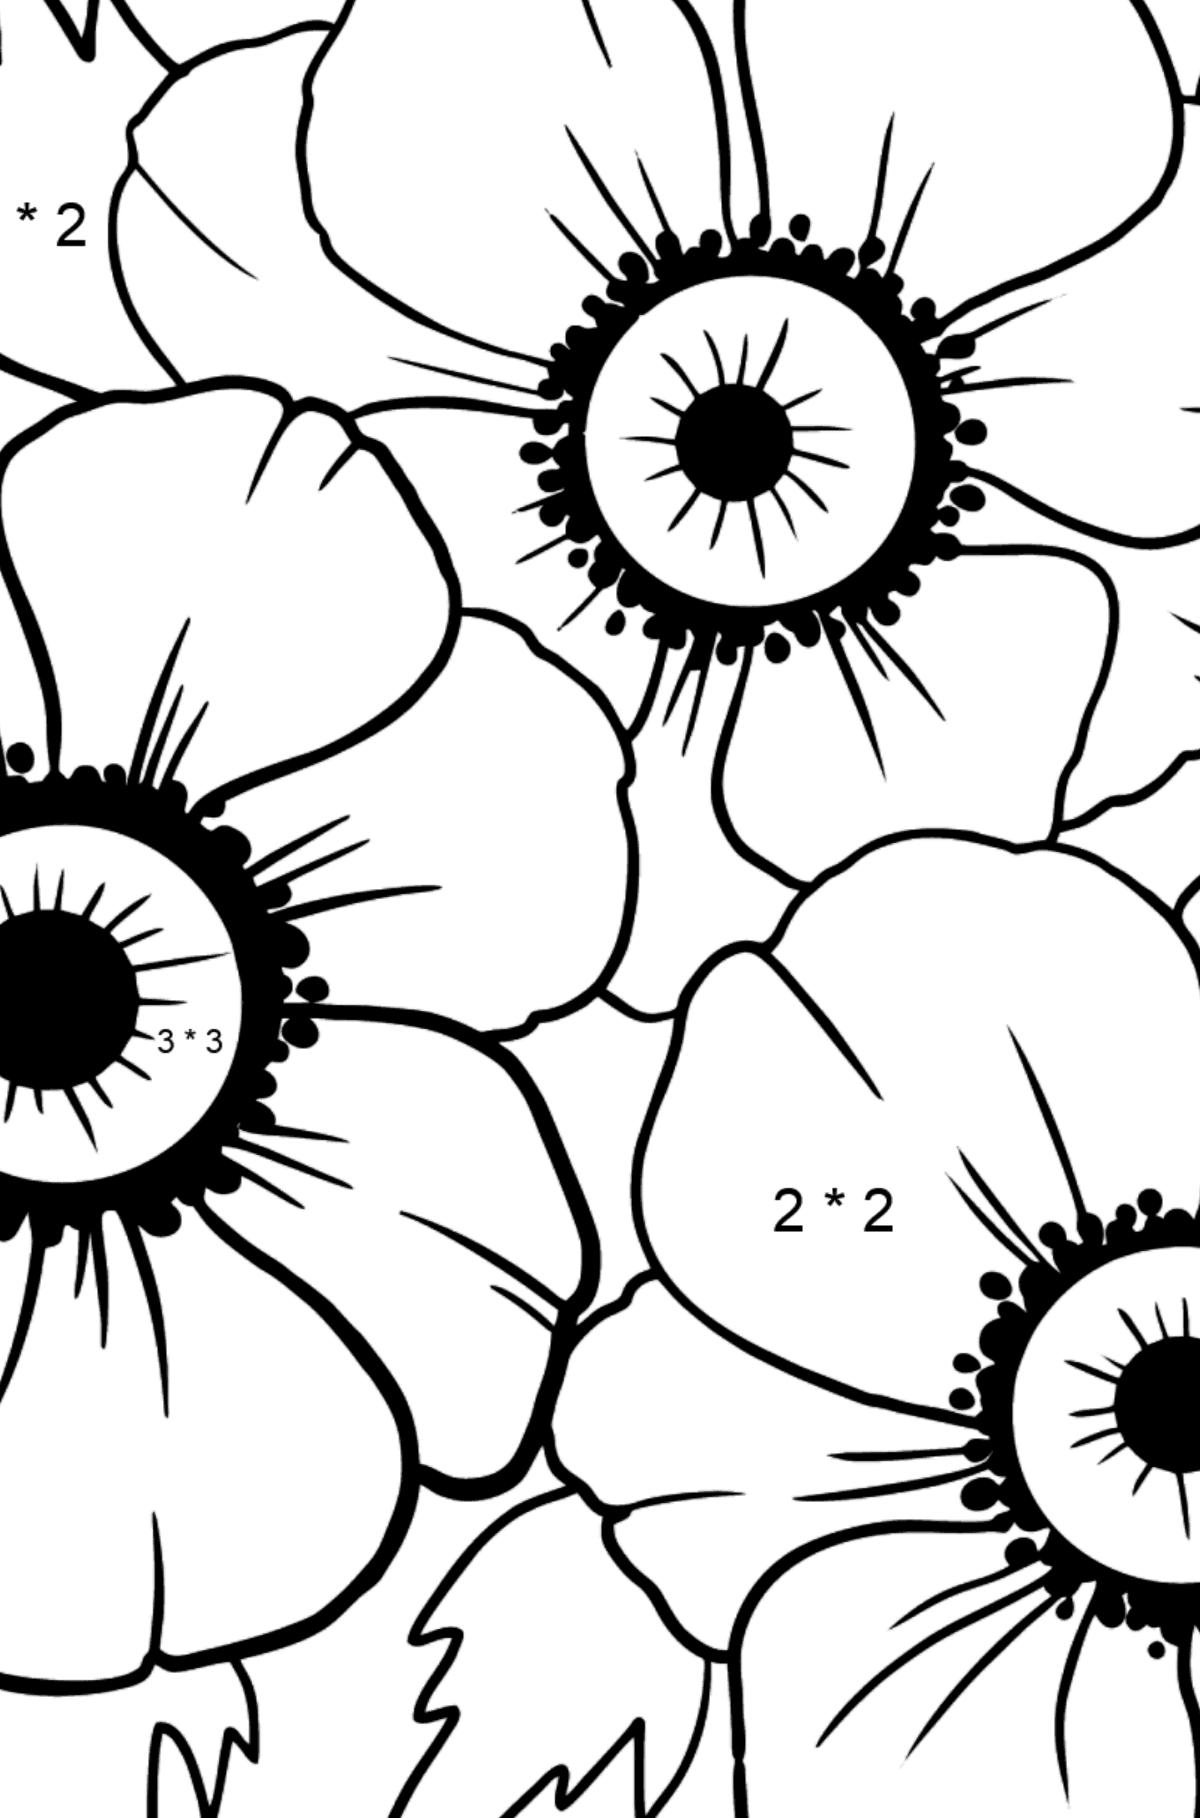 Coloring Page with big flower - A Red and Pink Anemone Coronaria - Math Coloring - Multiplication for Kids